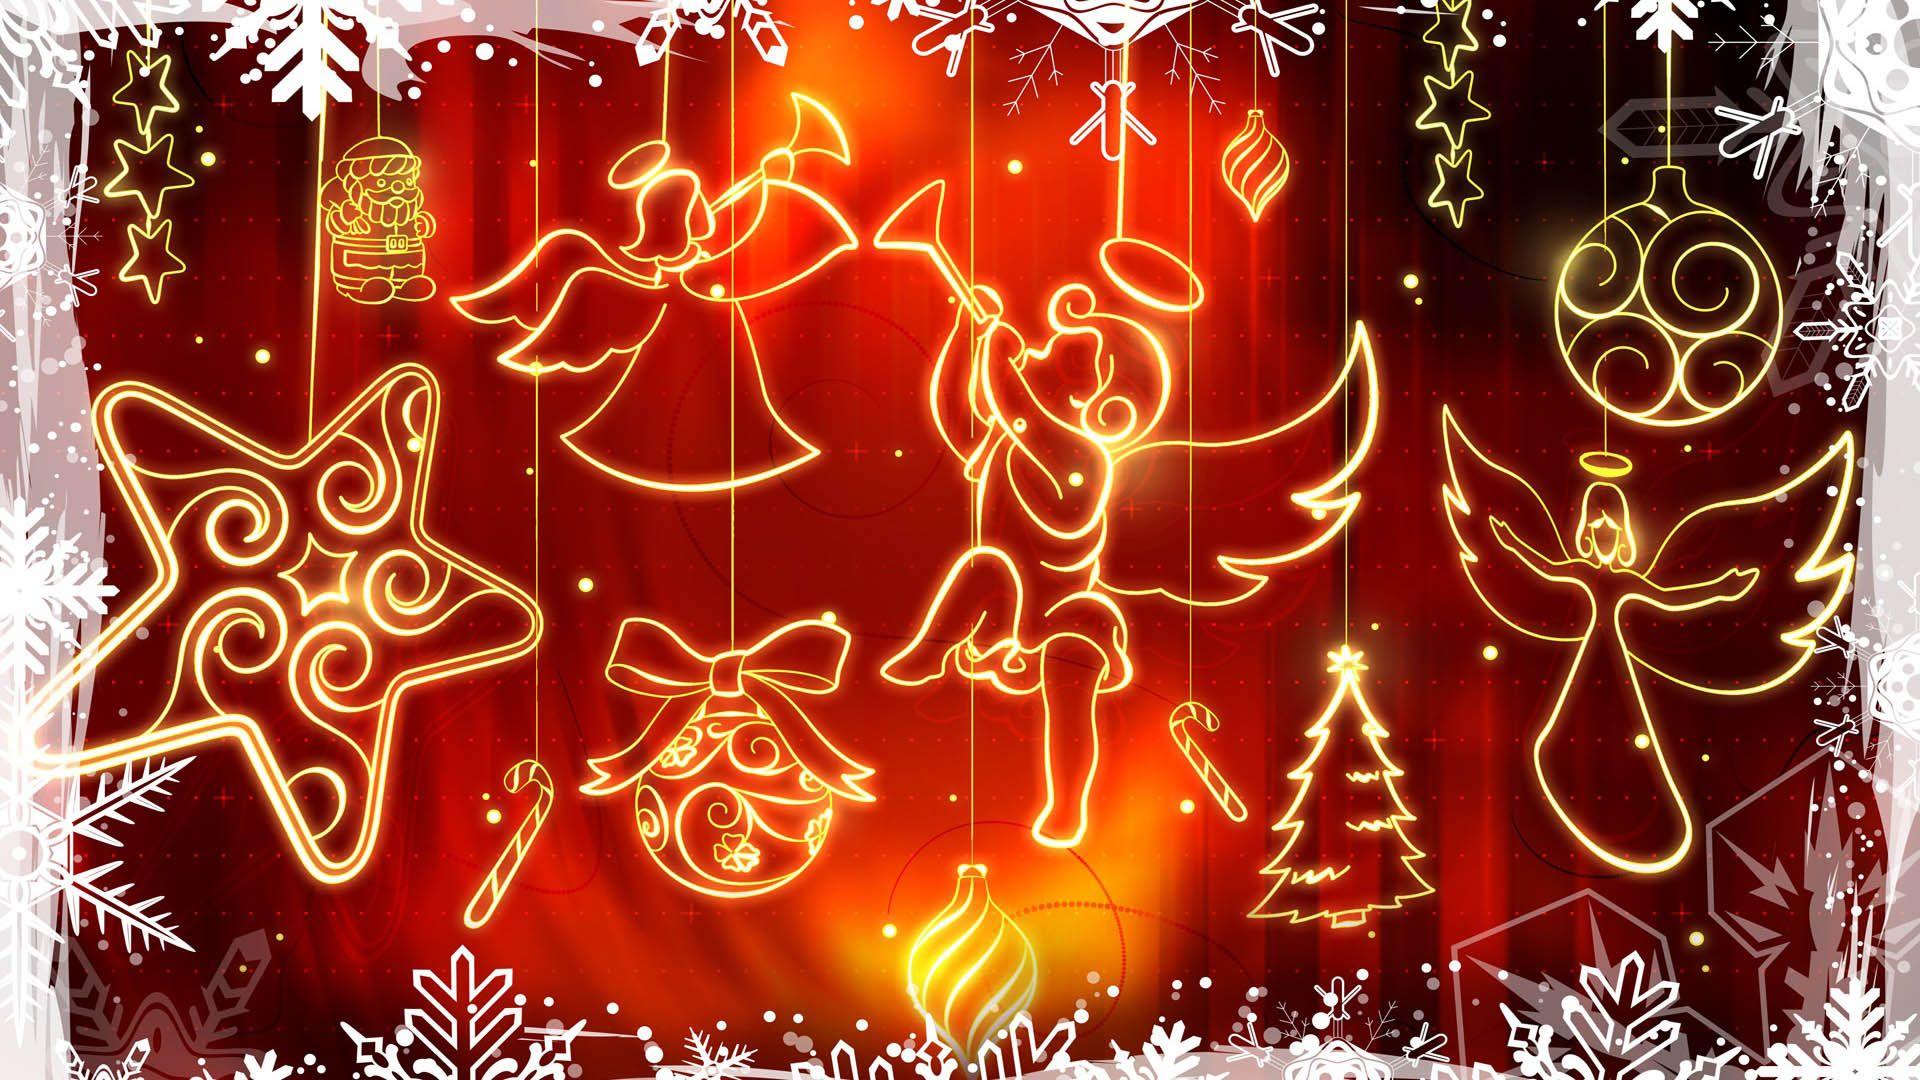 Get the Latest HD Christmas Wallpaper For Free